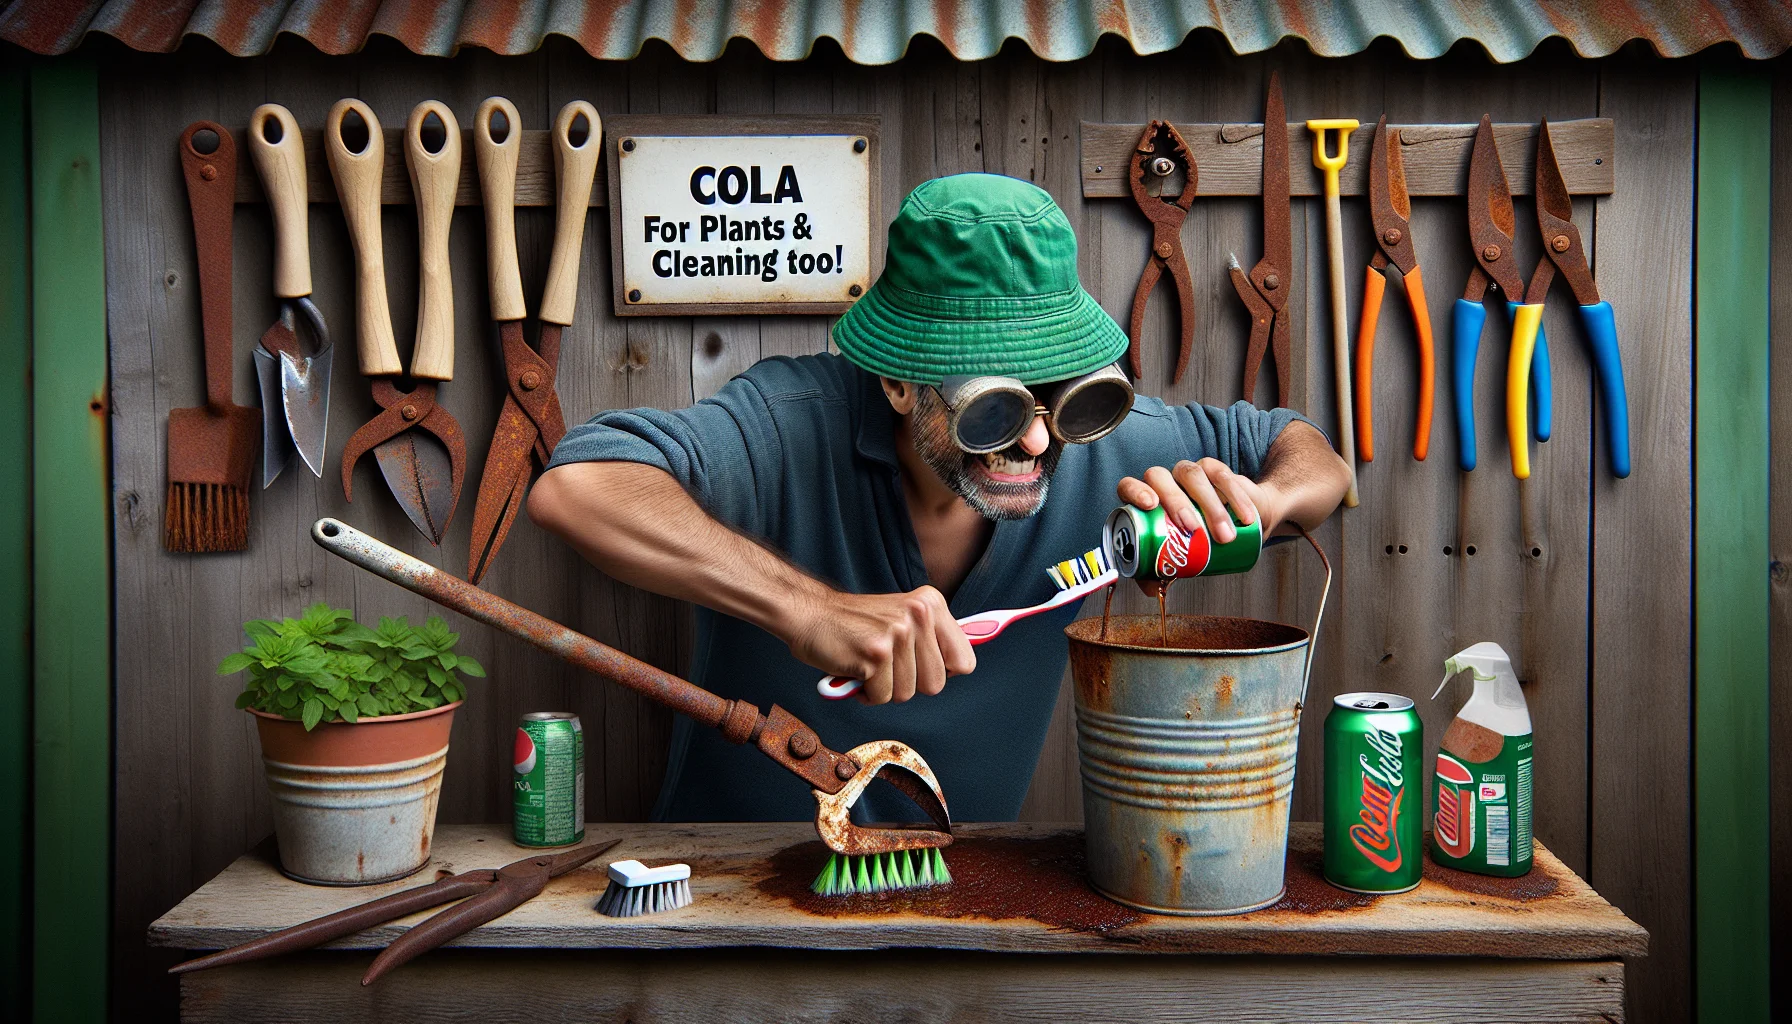 A humorous and realistic scene of a person trying to remove rust from garden tools. The individual, a Middle-Eastern man in his early thirties, is wearing a green gardening hat that's too large for his head, partly covering his eyes. He's armed with a toothbrush and a can of cola, energetically scrubbing the rust off a pair of antique pruning shears. The rustic garden shed background, with multiple gardening tools hanging, sets the scene. There are also 'instruction' signs humorously positioned, one says 'Cola: for plants & cleaning too!' Another sign details the steps - 'Dip, Scrub, repeat!' This delightful image should inspire people to embrace gardening despite minor setbacks like rusty tools.